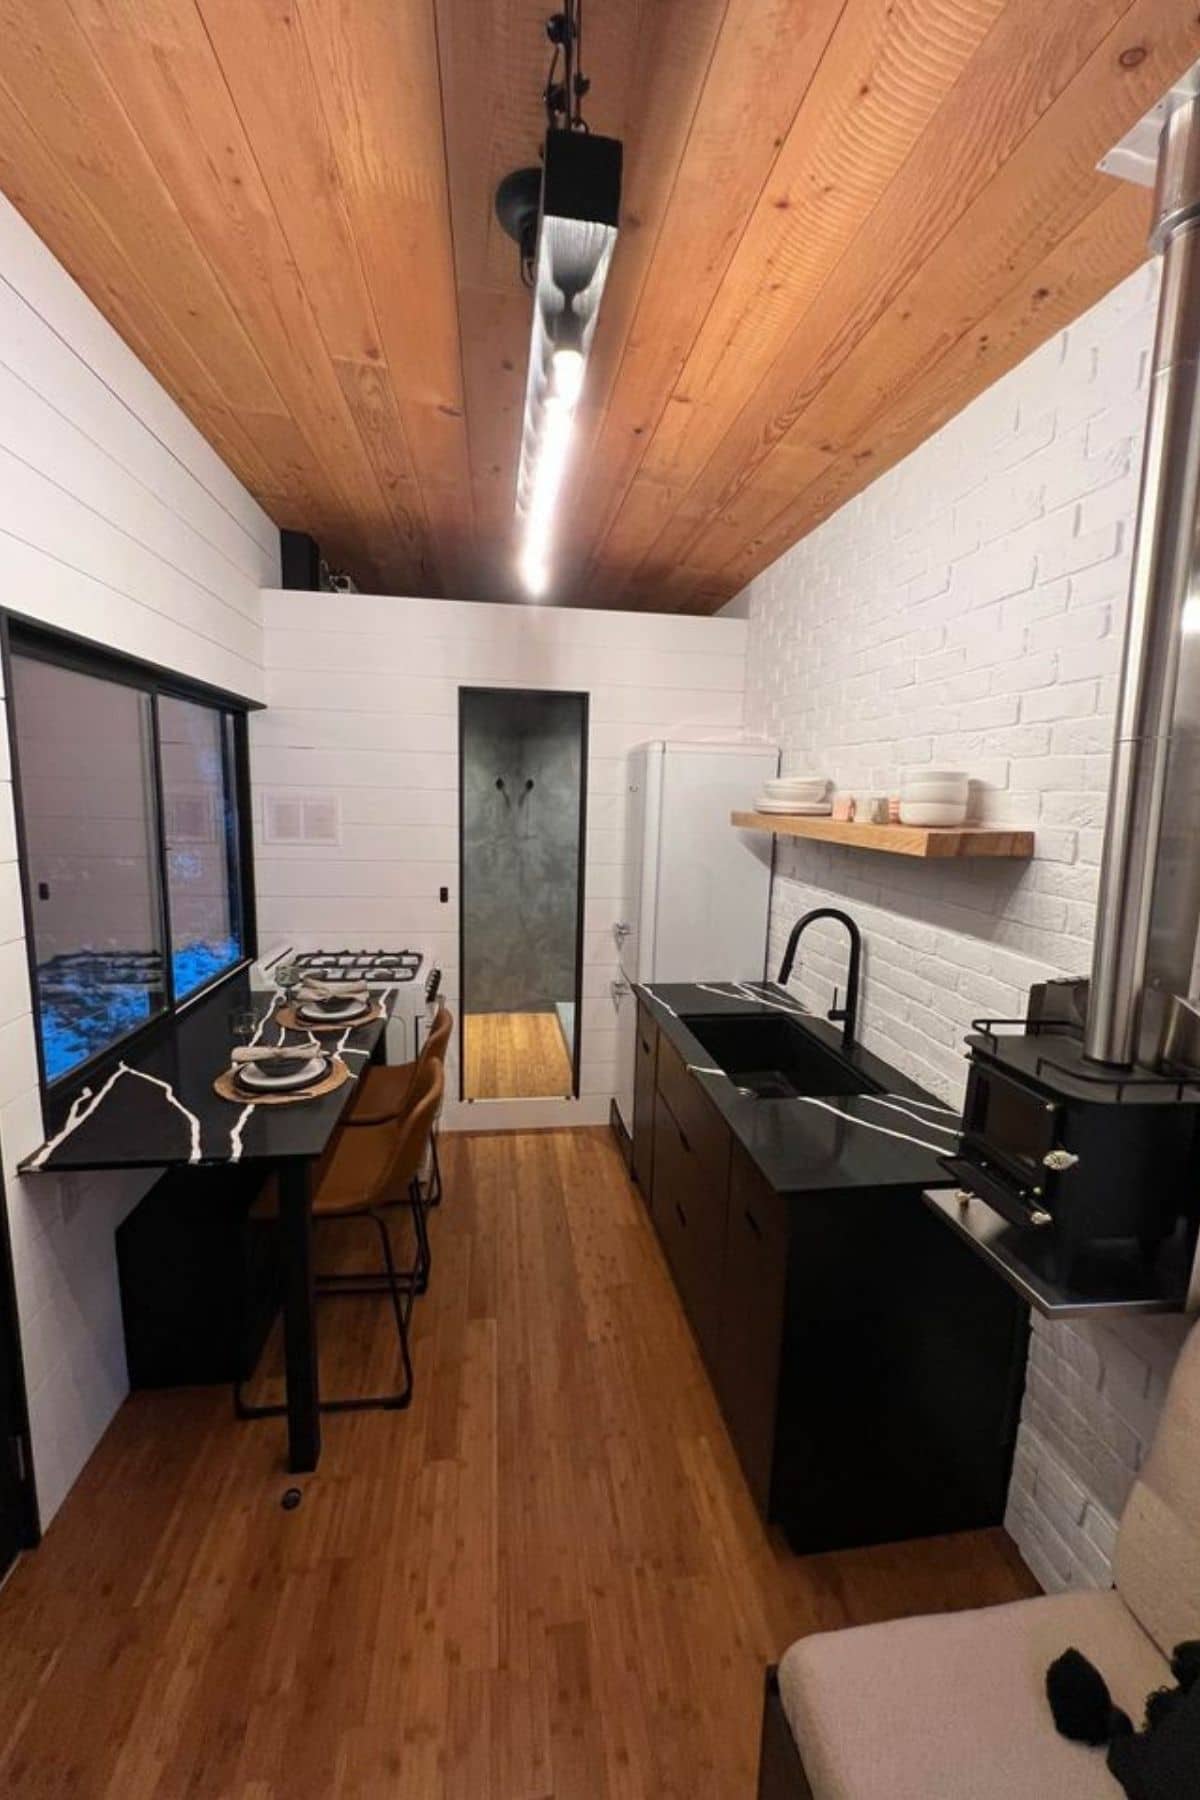 kitchen with dark cabinets against white walls in tiny home